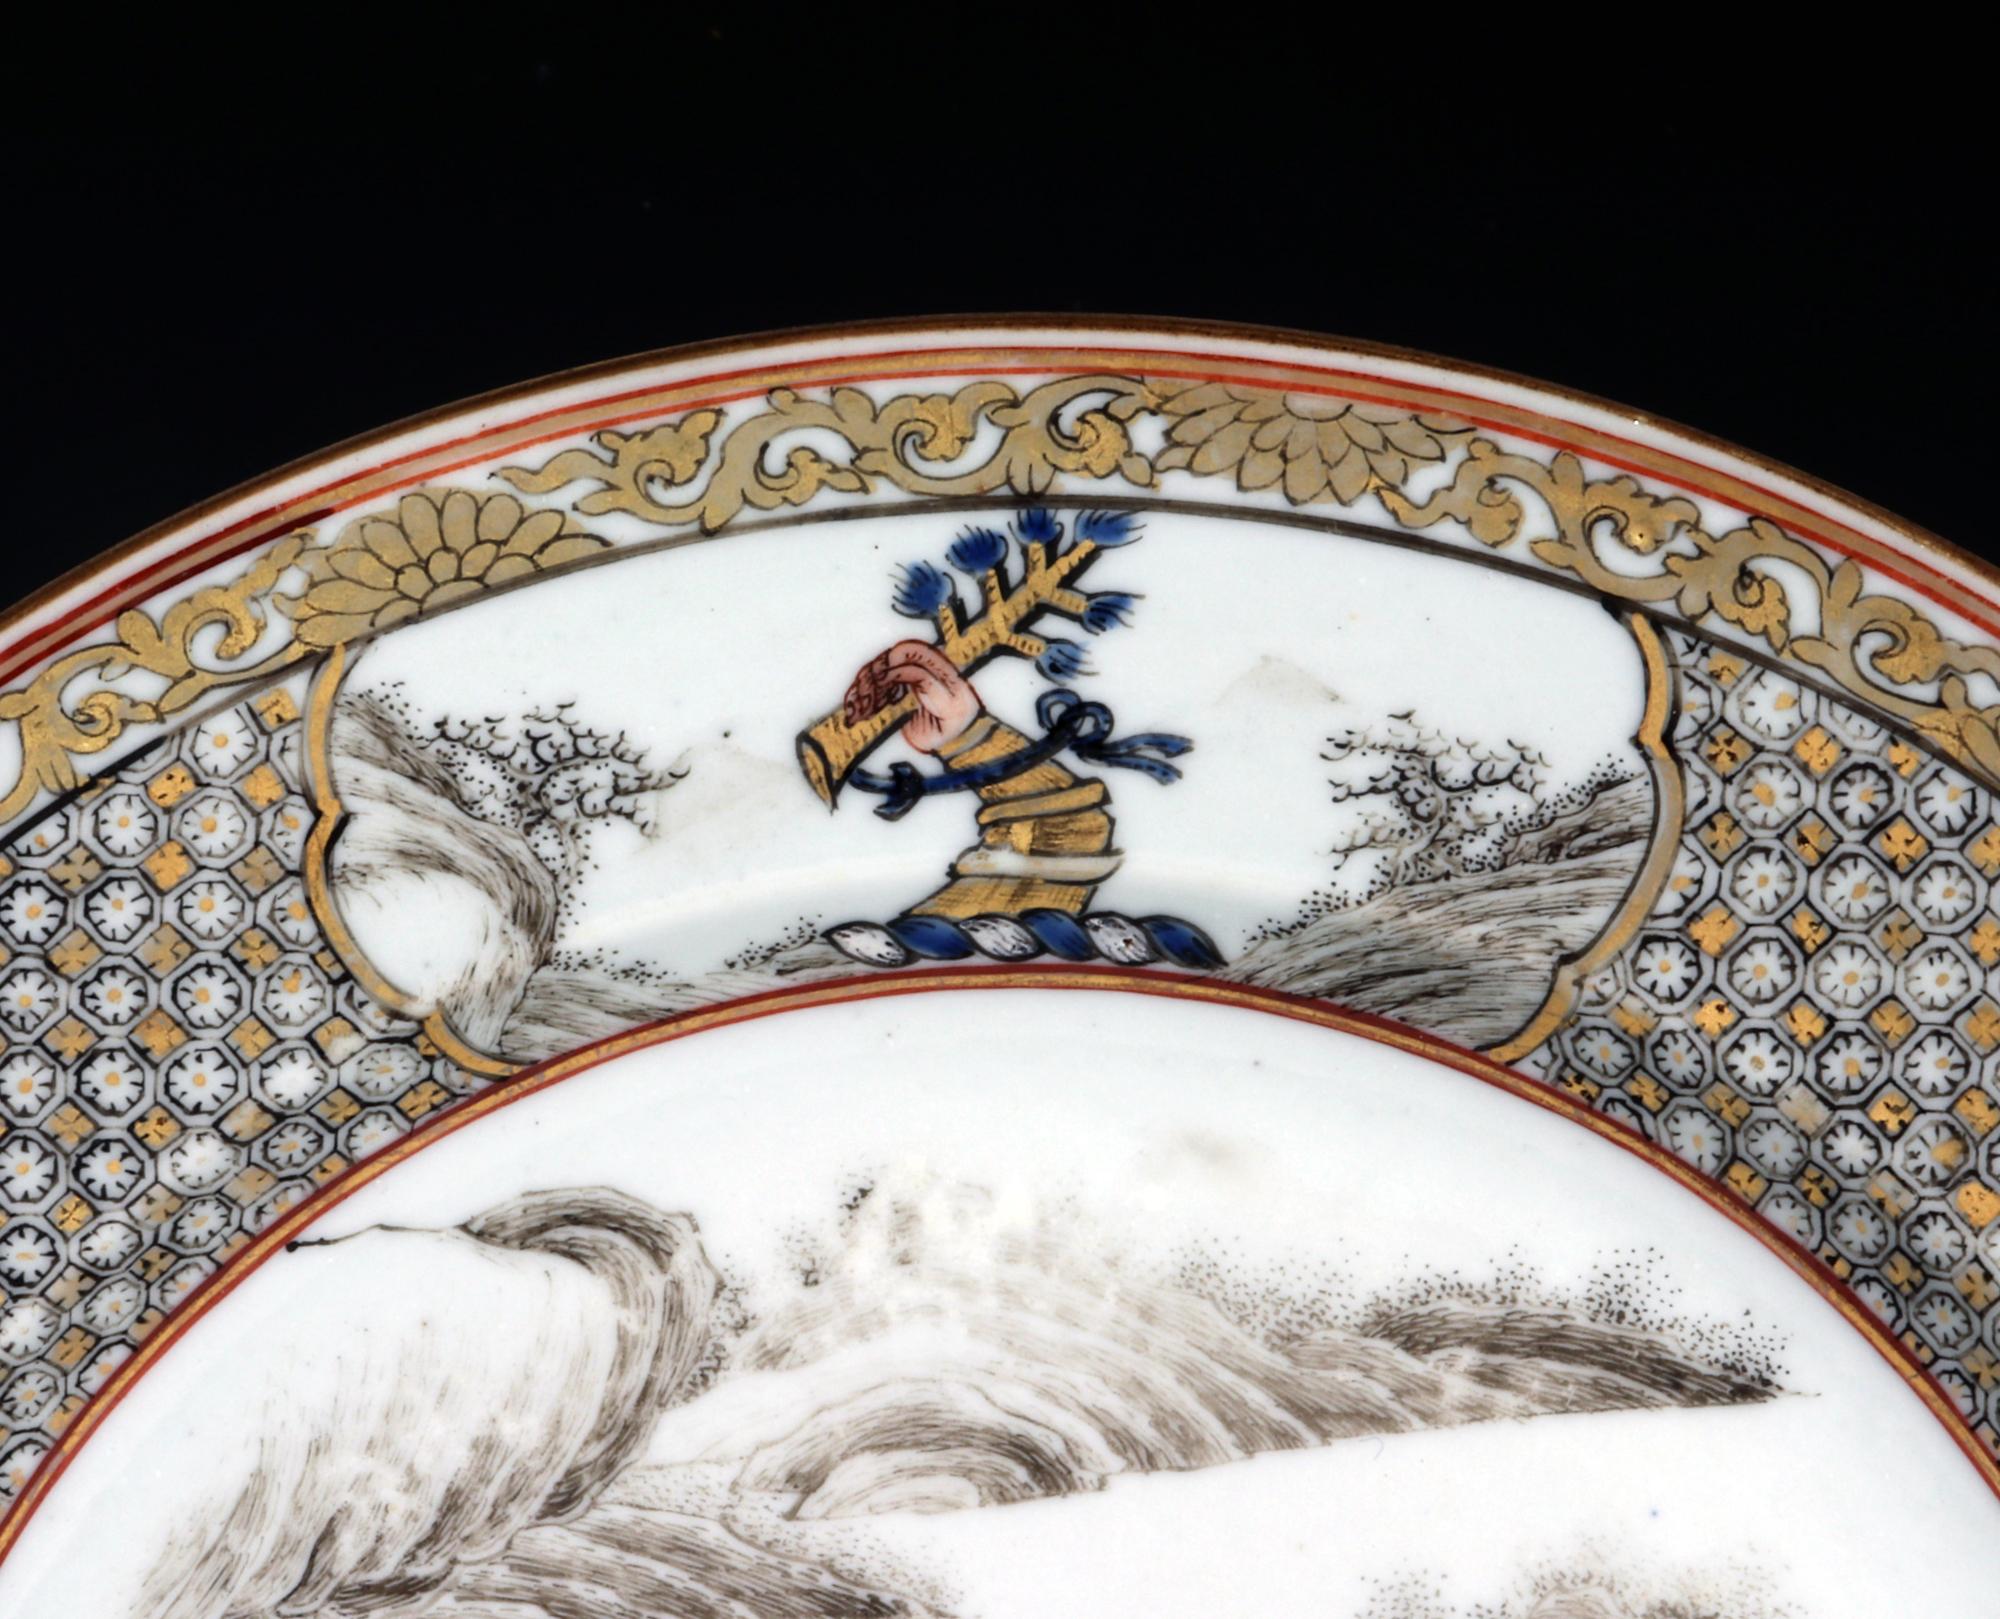 Yongzheng Chinese Export Porcelain Plate with Arms of Elwick of Middlesex For Sale 1